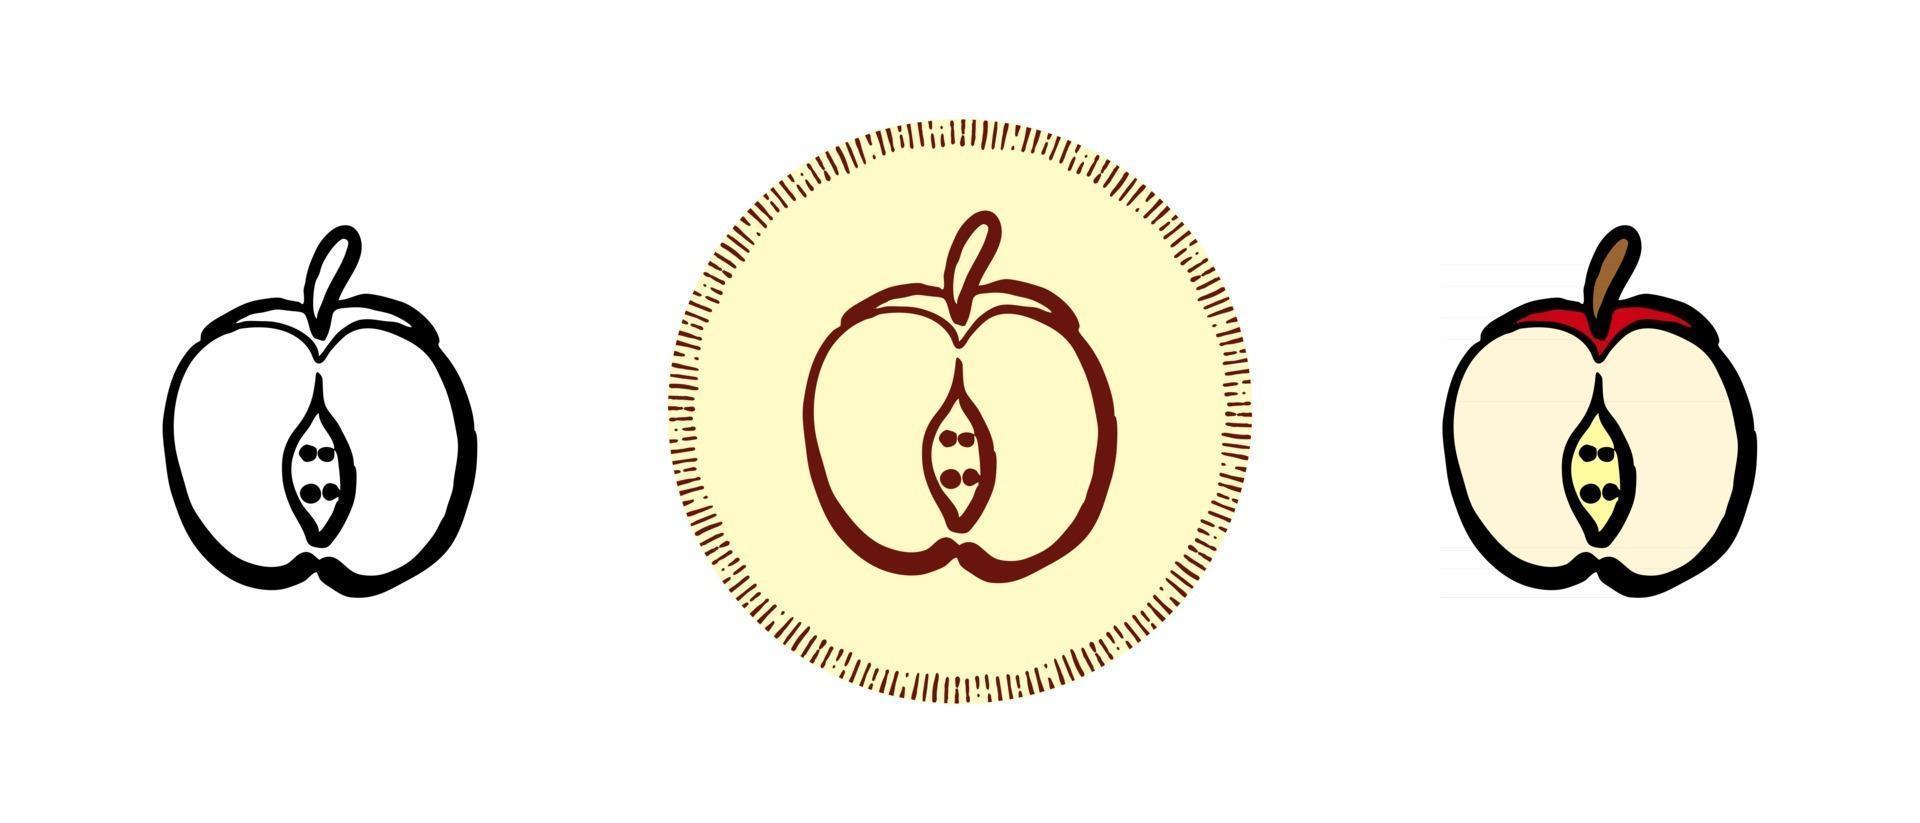 Contour and color and retro symbols of a cut apple vector